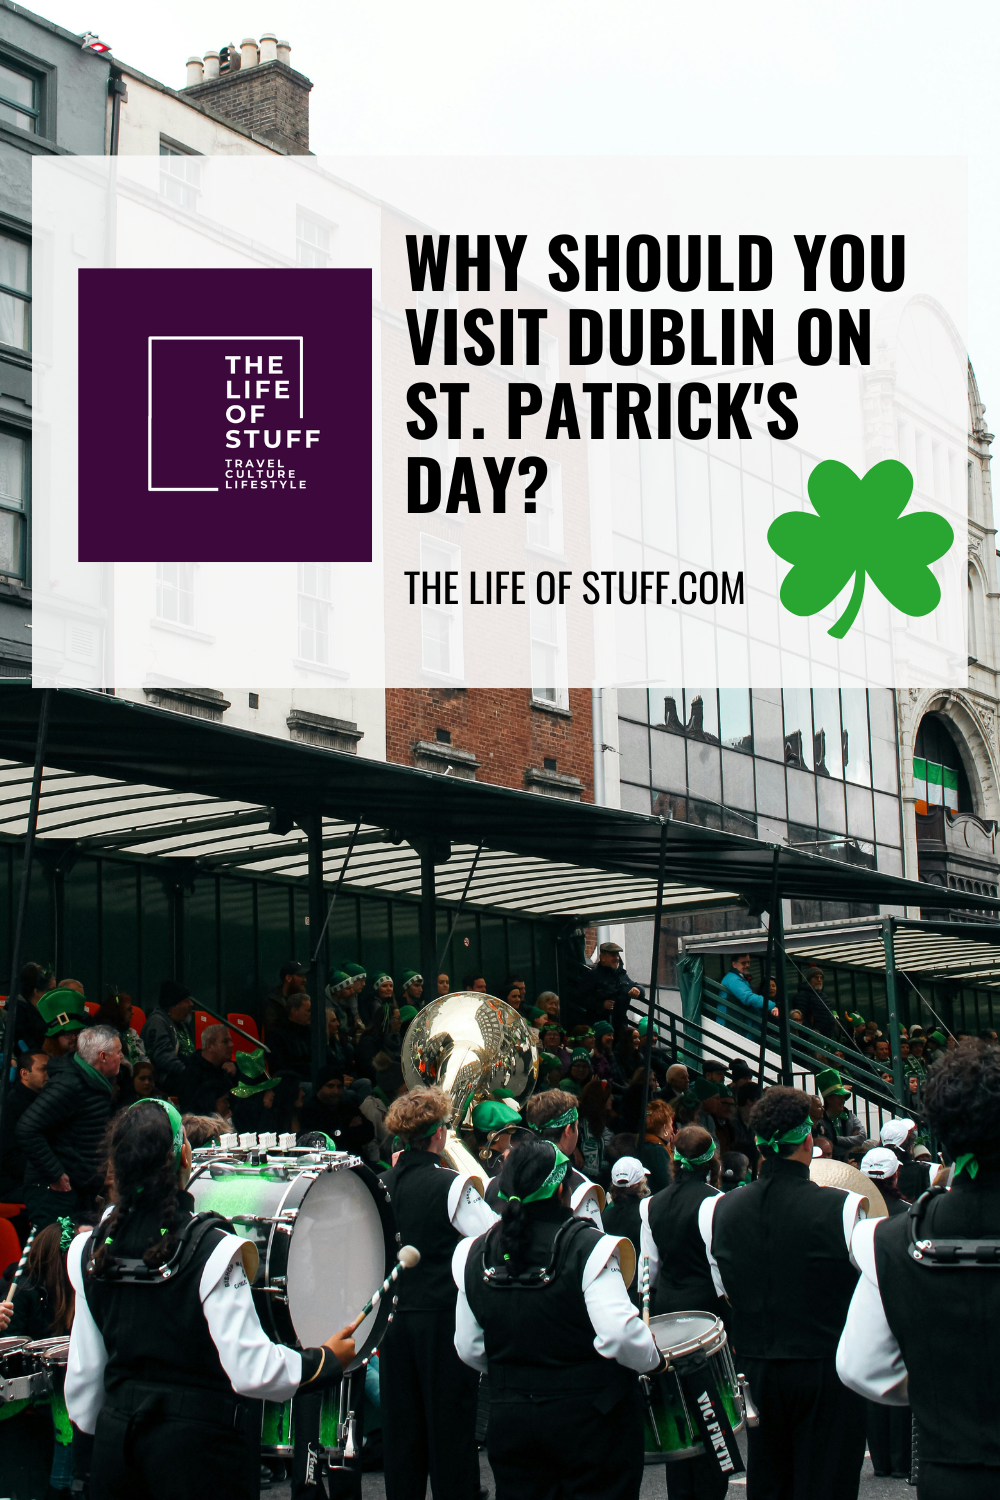 Why Should You Visit Dublin on St. Patrick's Day? - The Life of Stuff